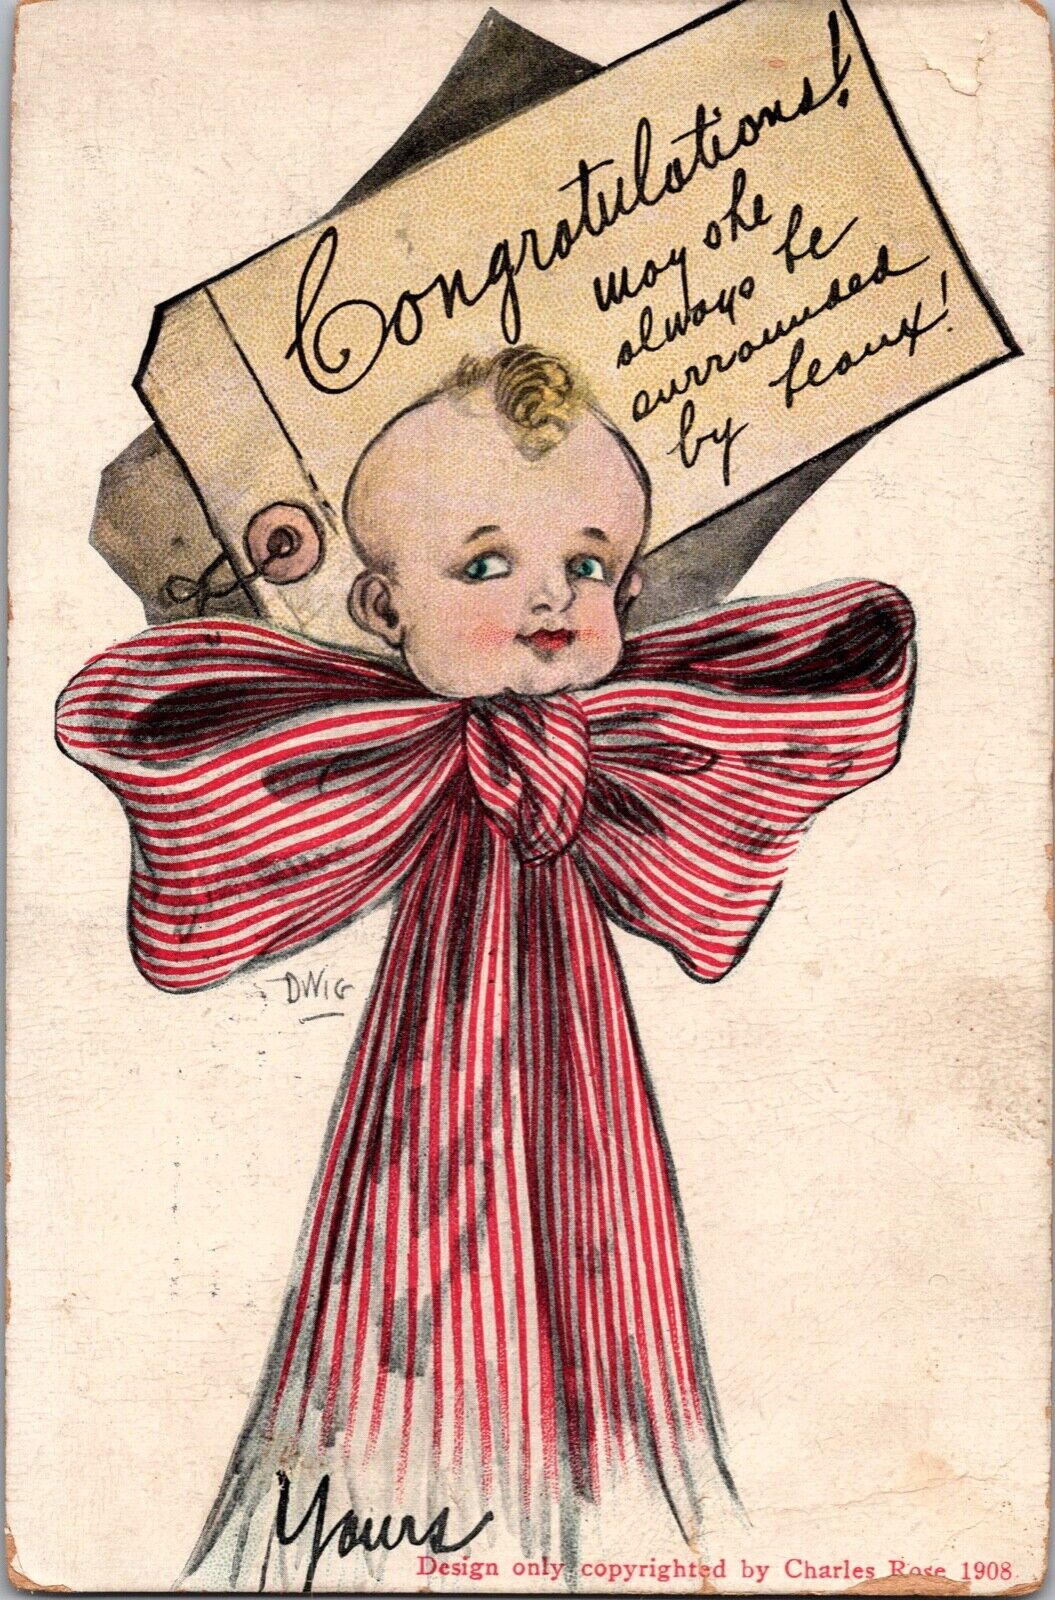 DWIG Artist Signed Congratulations Baby With Bow Tie c1911 c1908 Postcard